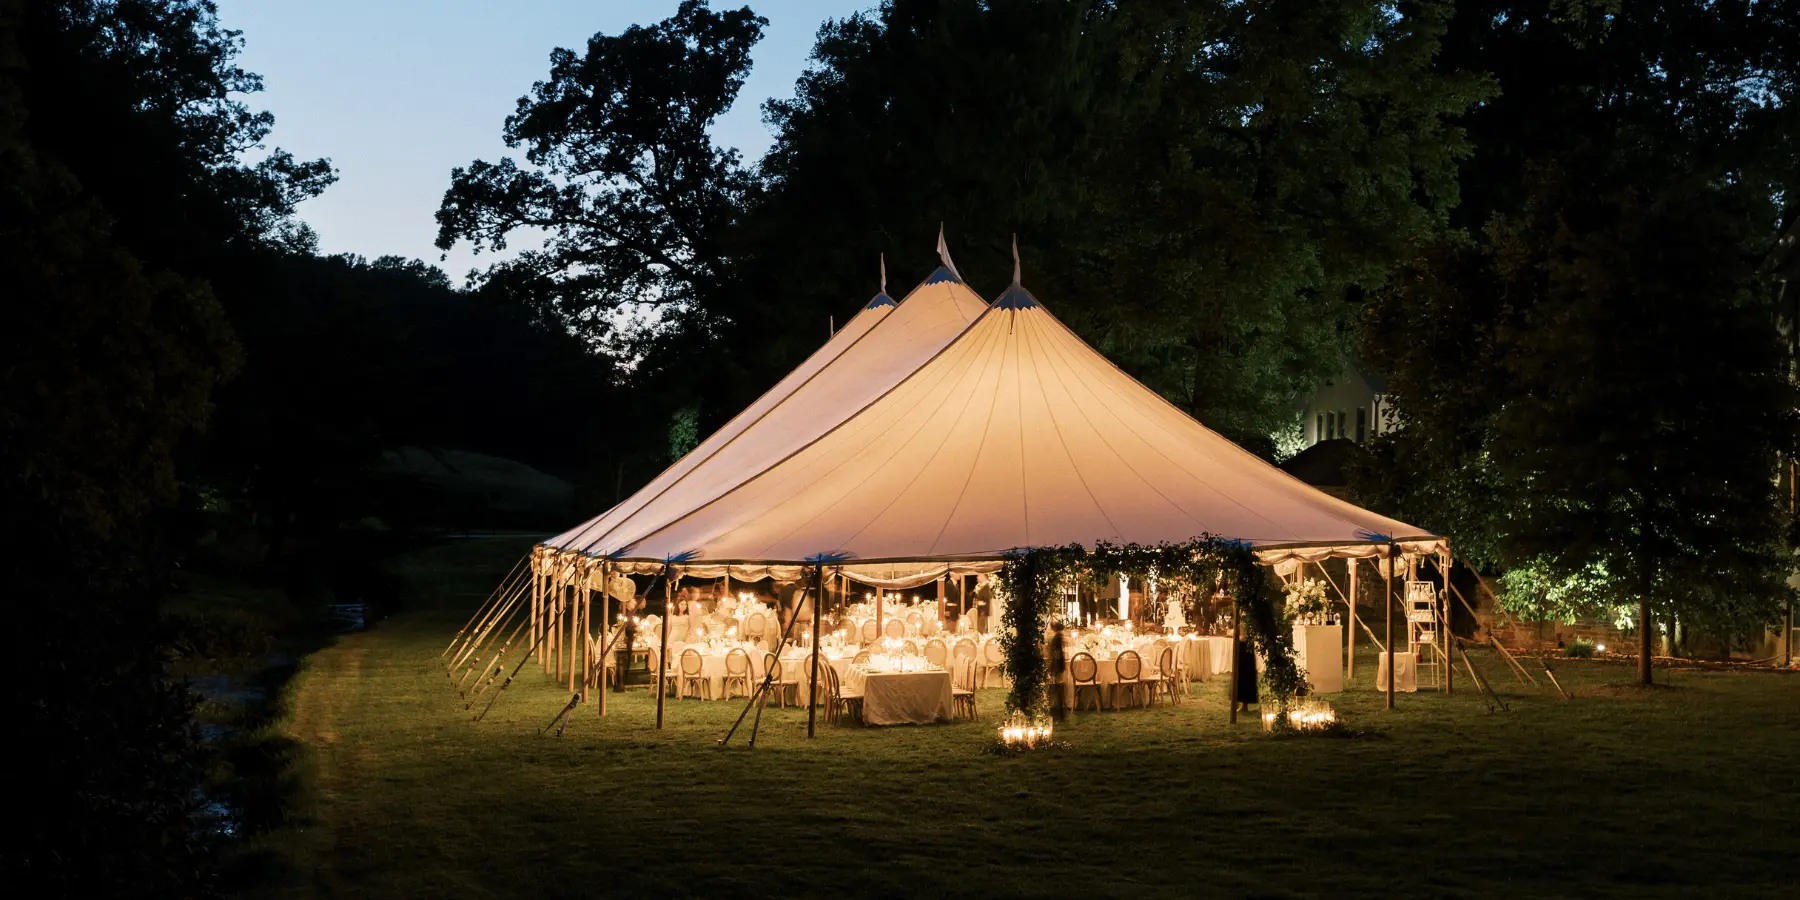 Sailcloth Tent Rental for a Winterthur Wedding Glowing at Night